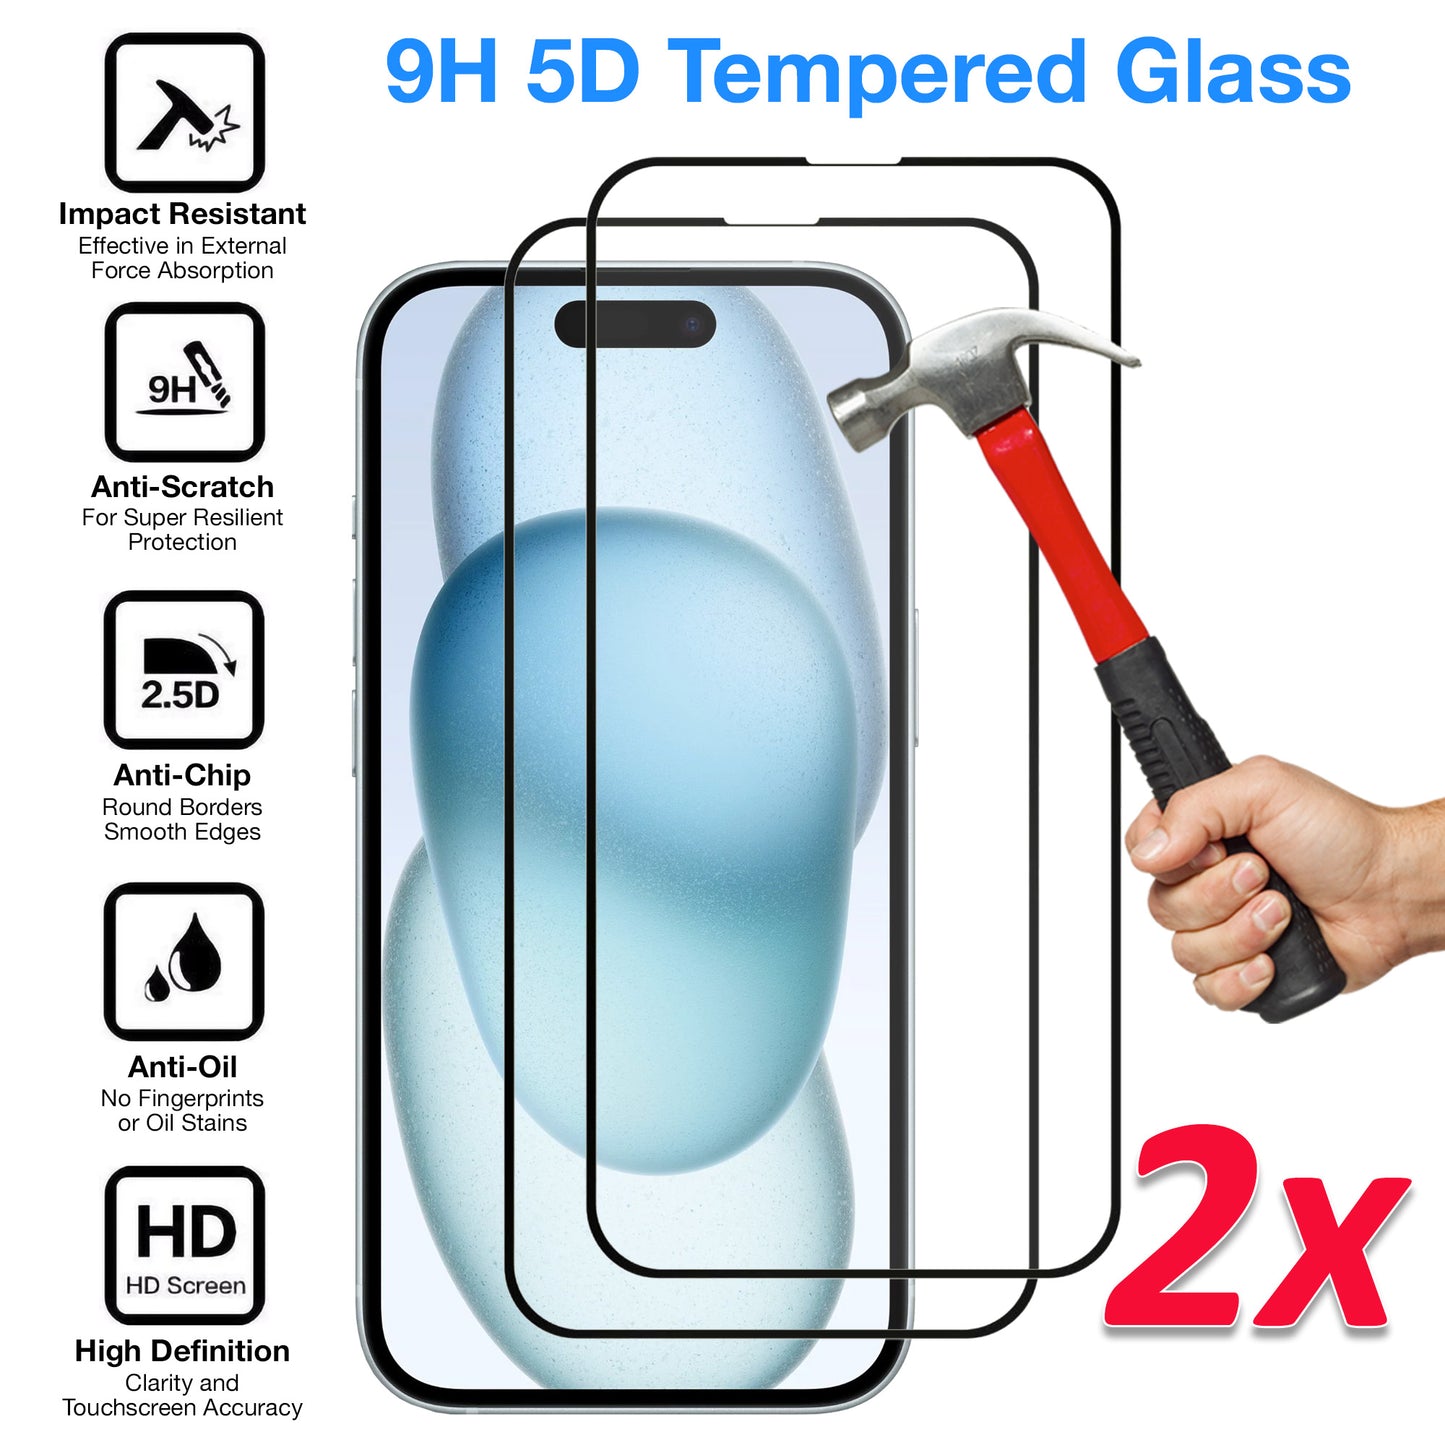 [2 Pack] MEZON Full Coverage Tempered Glass for iPhone 15 (6.1") Crystal Clear Premium 9H HD Screen Protector